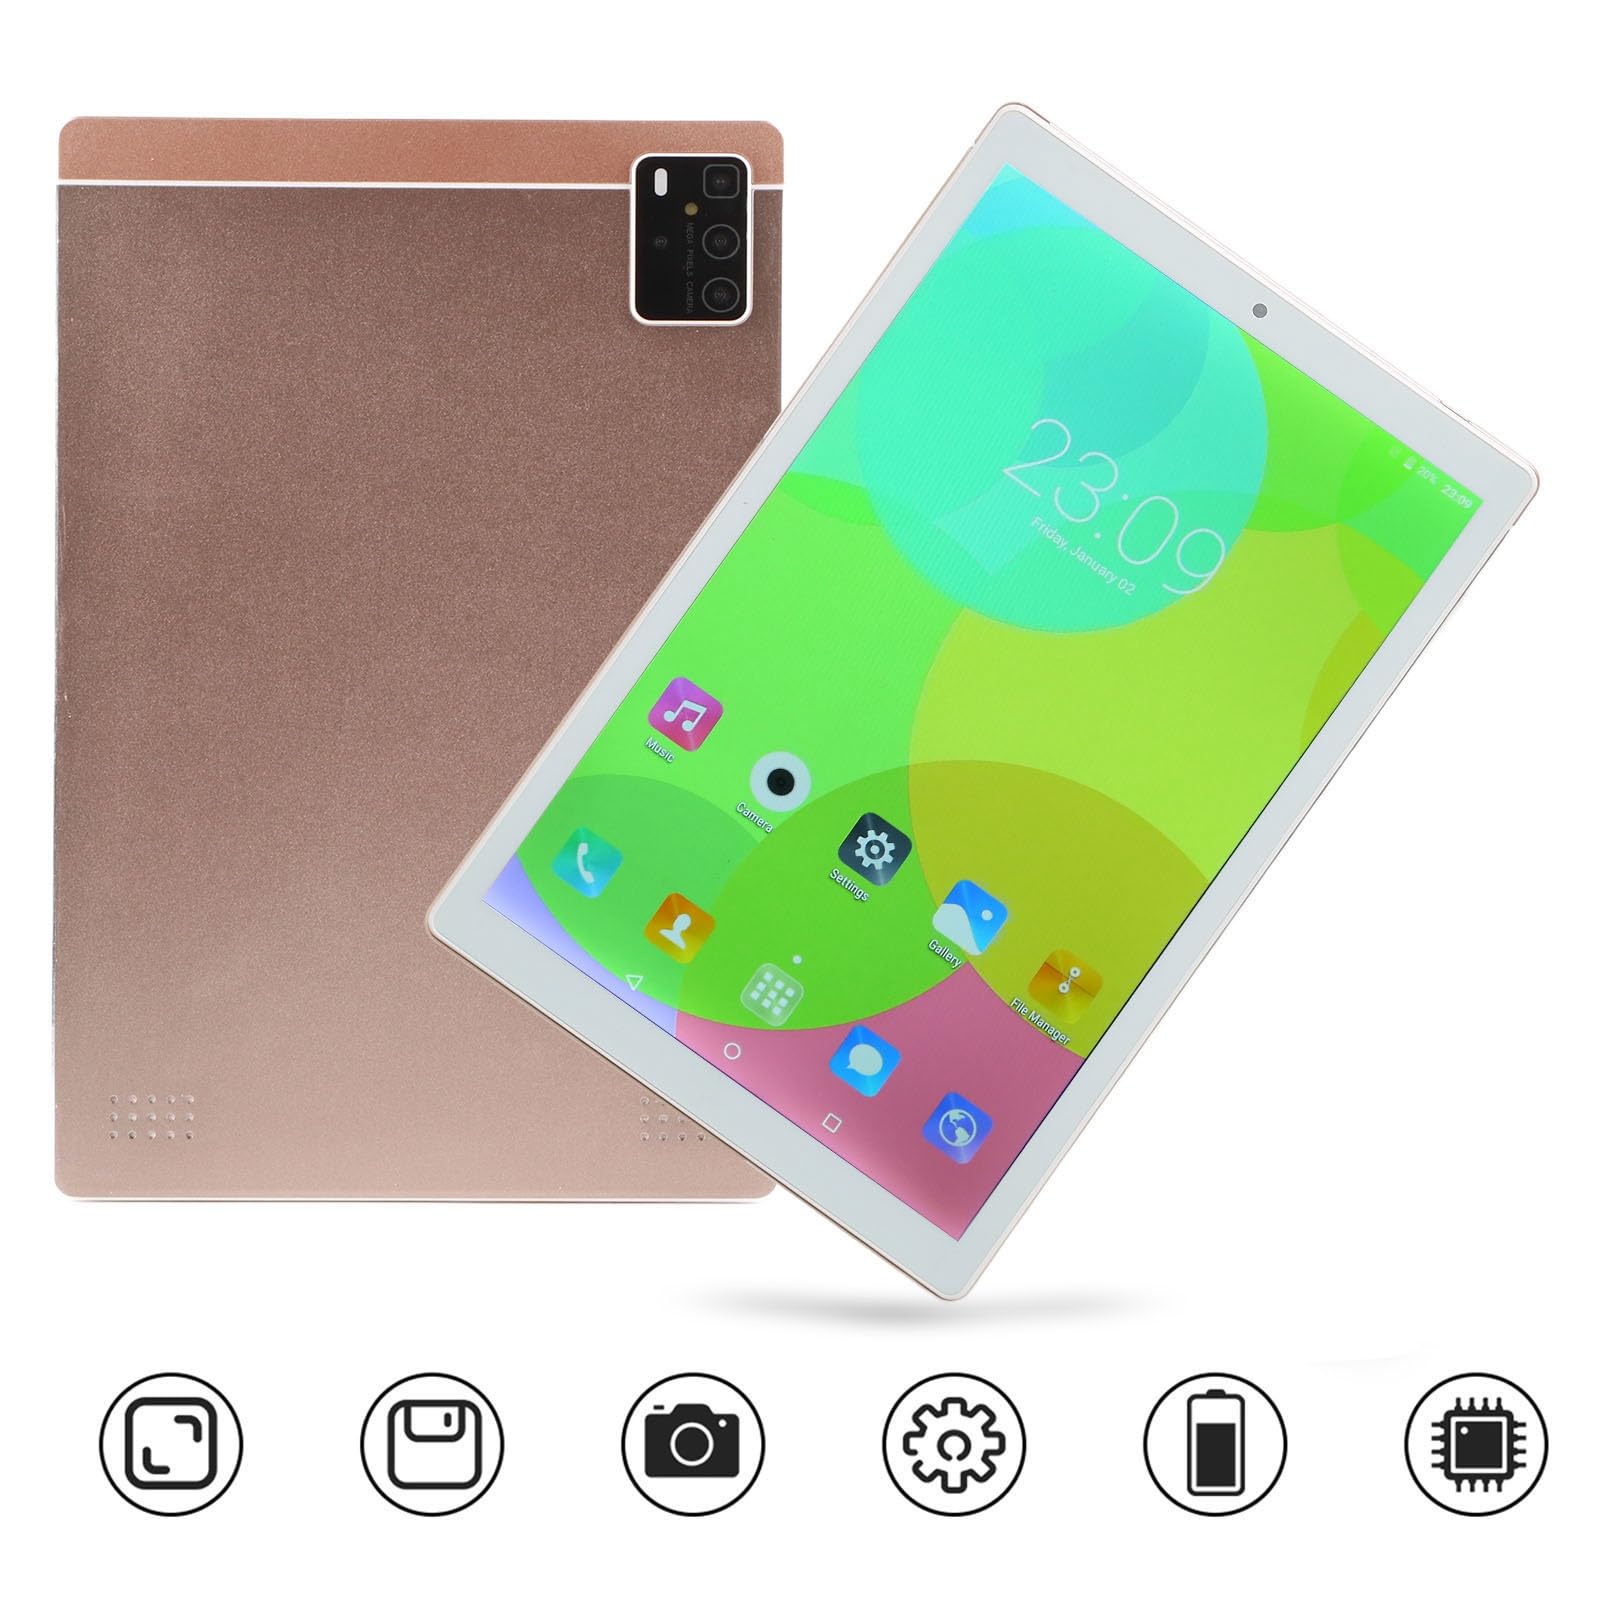 Zopsc 10.1in Talkable Smart Tablet for Android5.1 Support 2.4 5G WiFi 1 16GB 1280 * 800 0.3 2MP MT6592 Octa Core 3000mAh 100 240V Gold